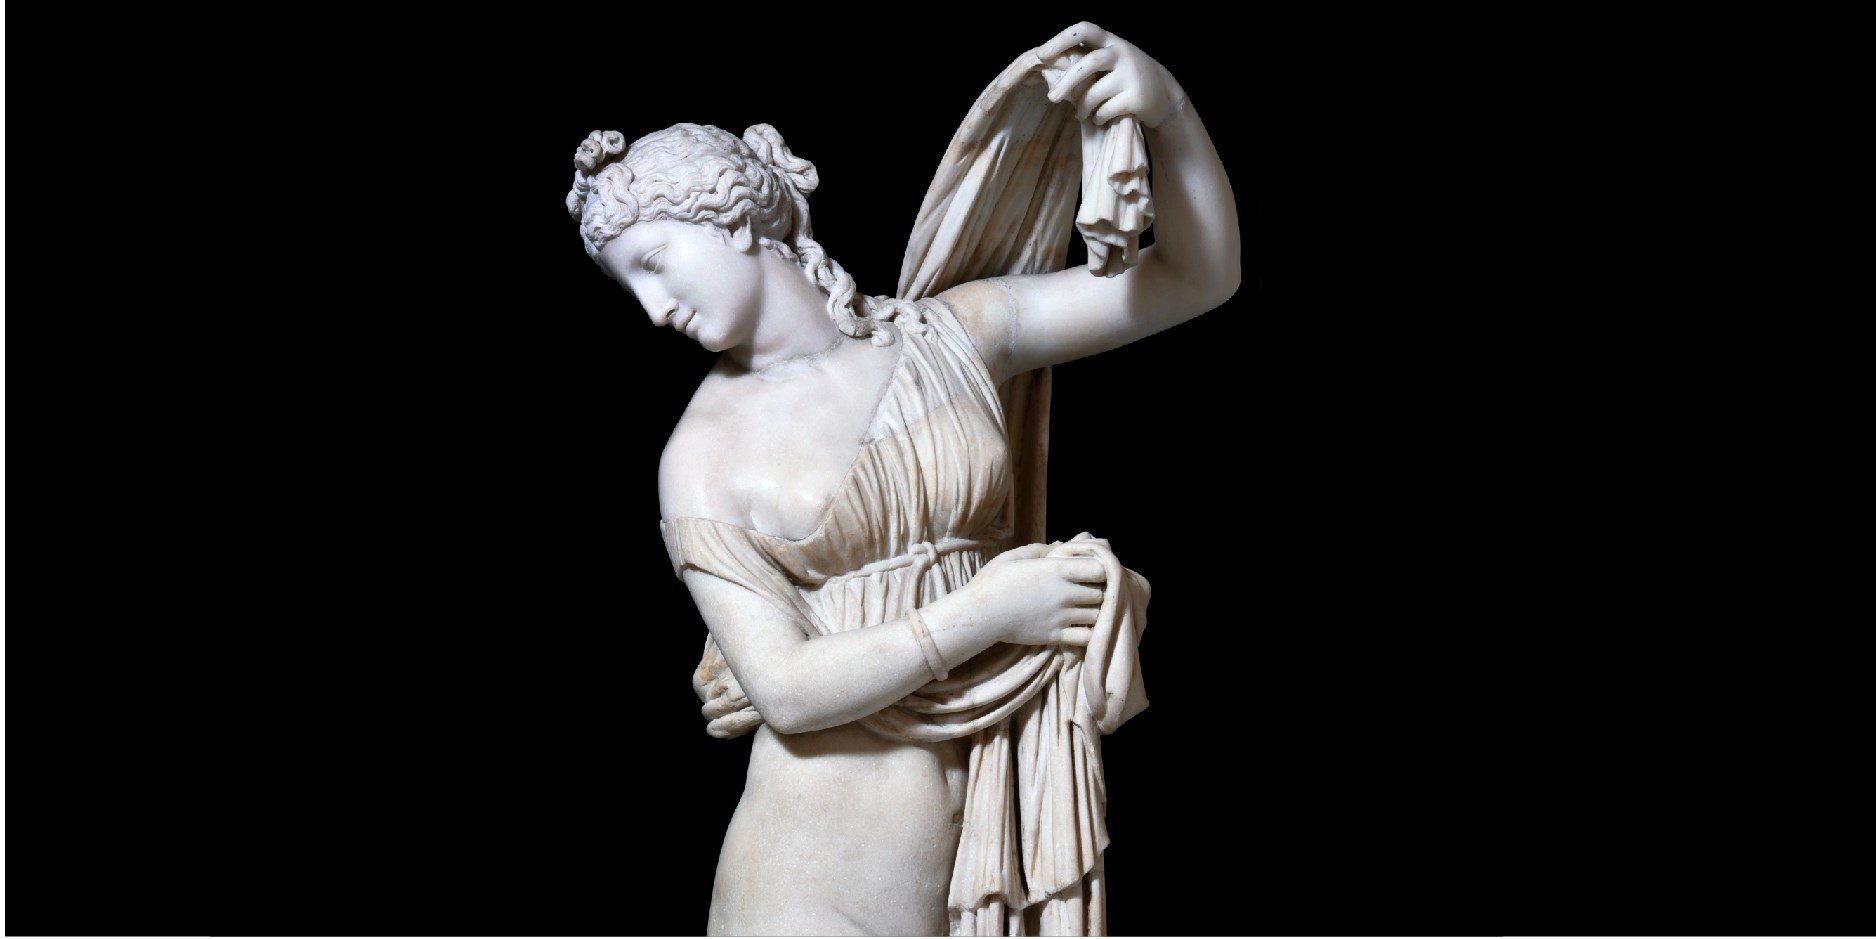  A World of Beauty - Masterpieces from the National Archaeological Museum of Naples